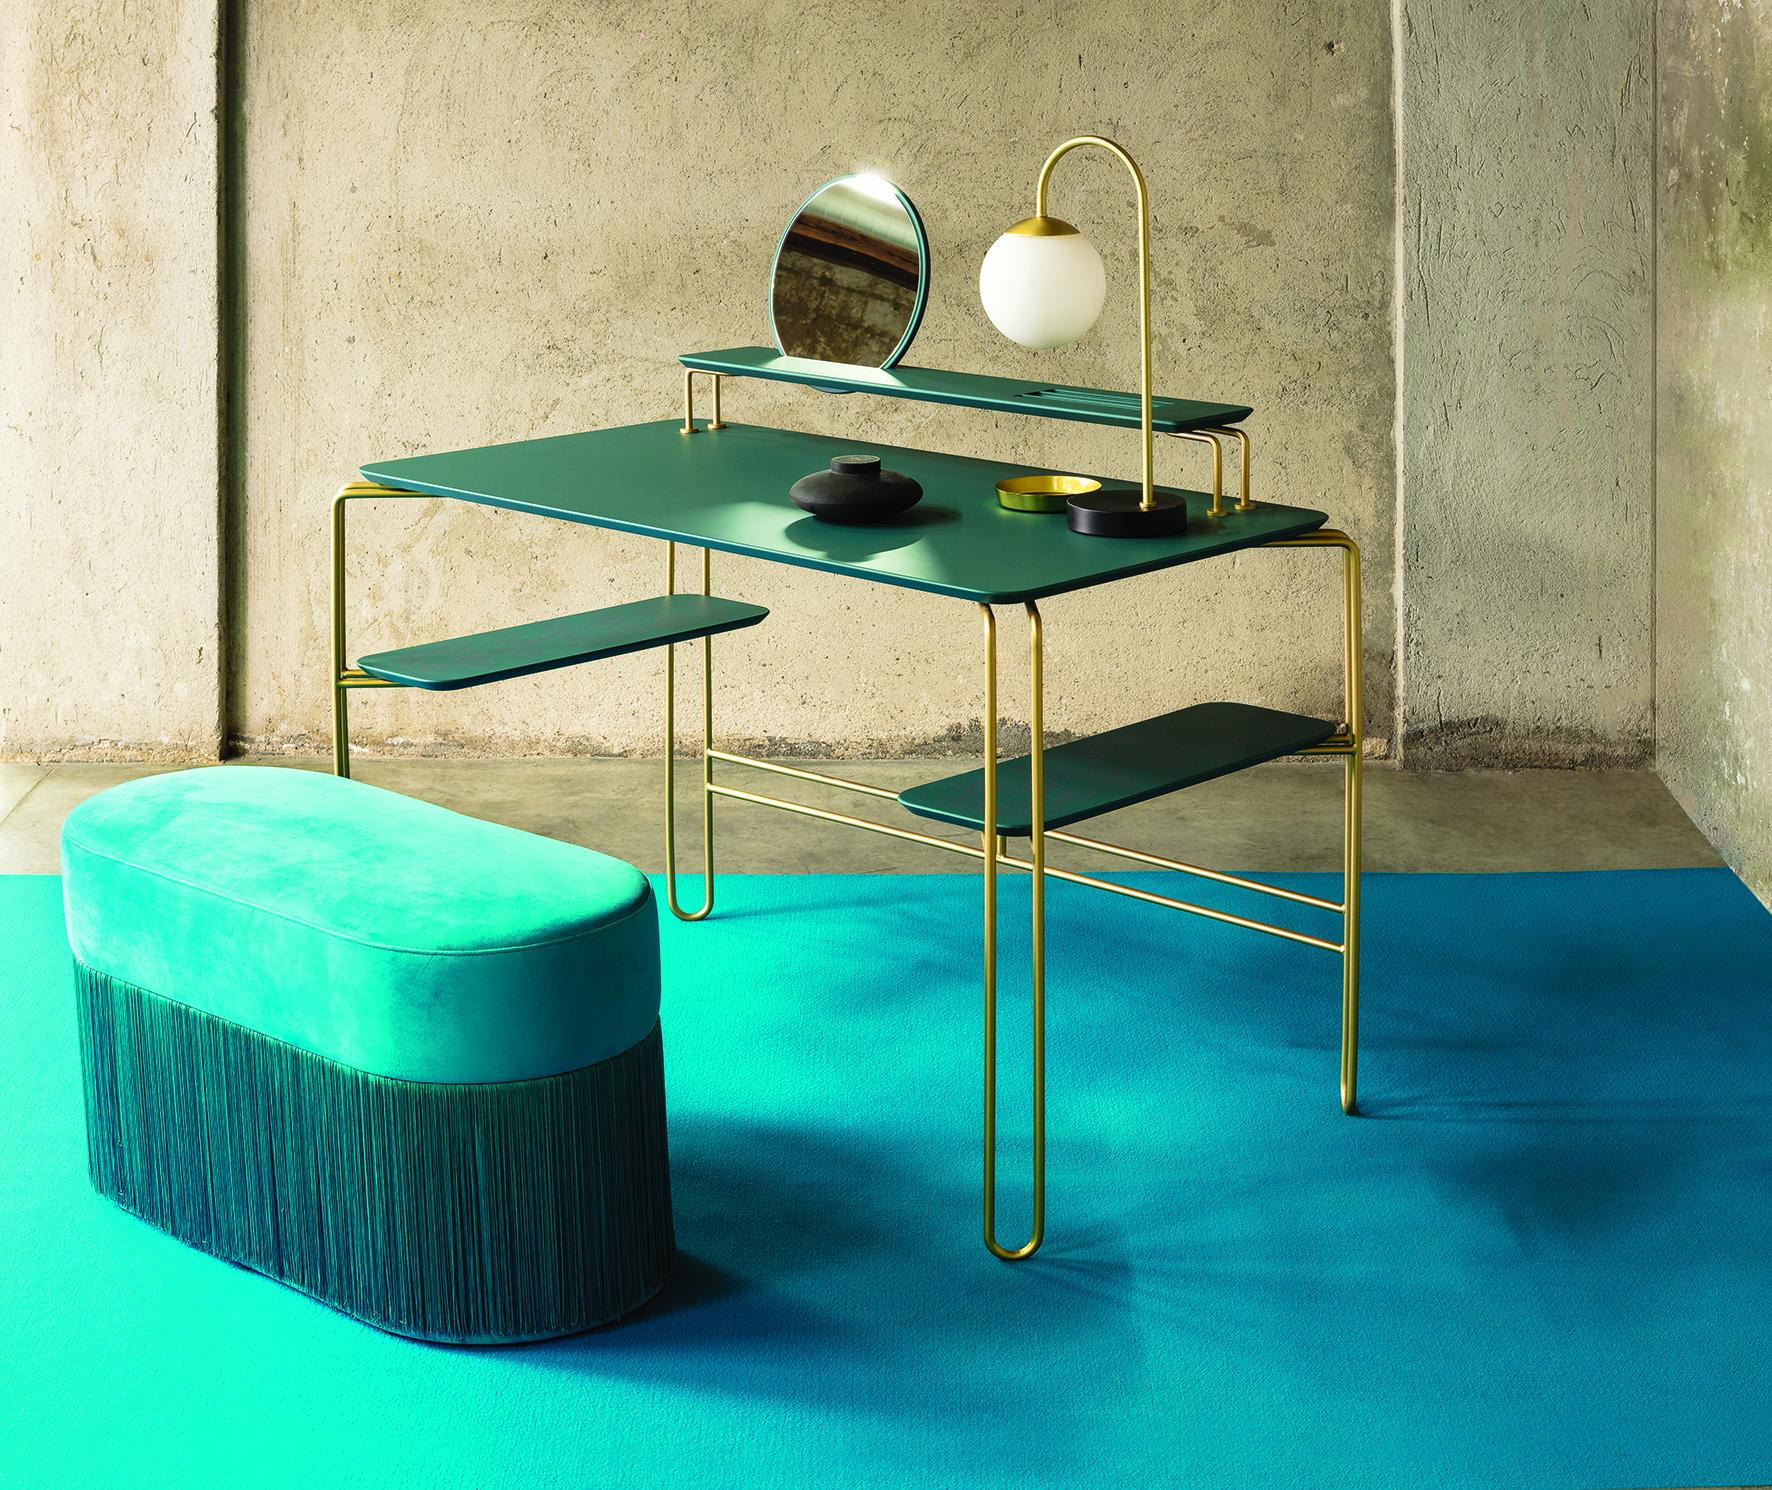 Grimilde console table by Mentemano
Dimensions: W 120 x D 65 x H 88 cm
Materials: Steel, wood, mirror 
Other colors available.

Console desk made of bended coated steel defined by clear and minimal lines with lacquered wood shelves. The two